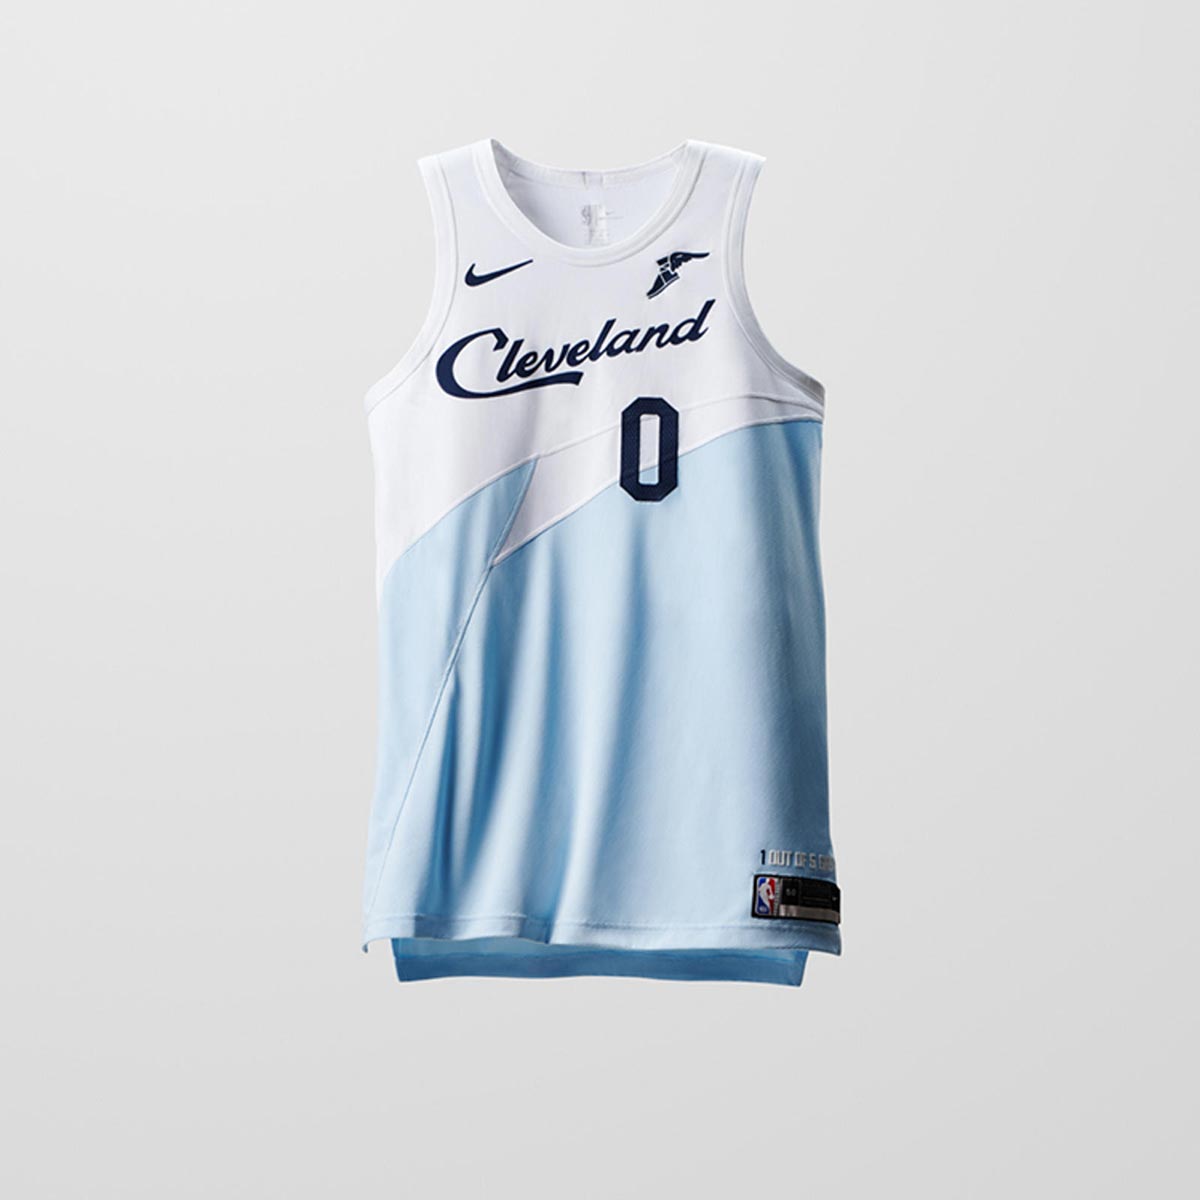 NBA playoff teams get new perk with Nike Earned Edition uniforms SPIN.ph